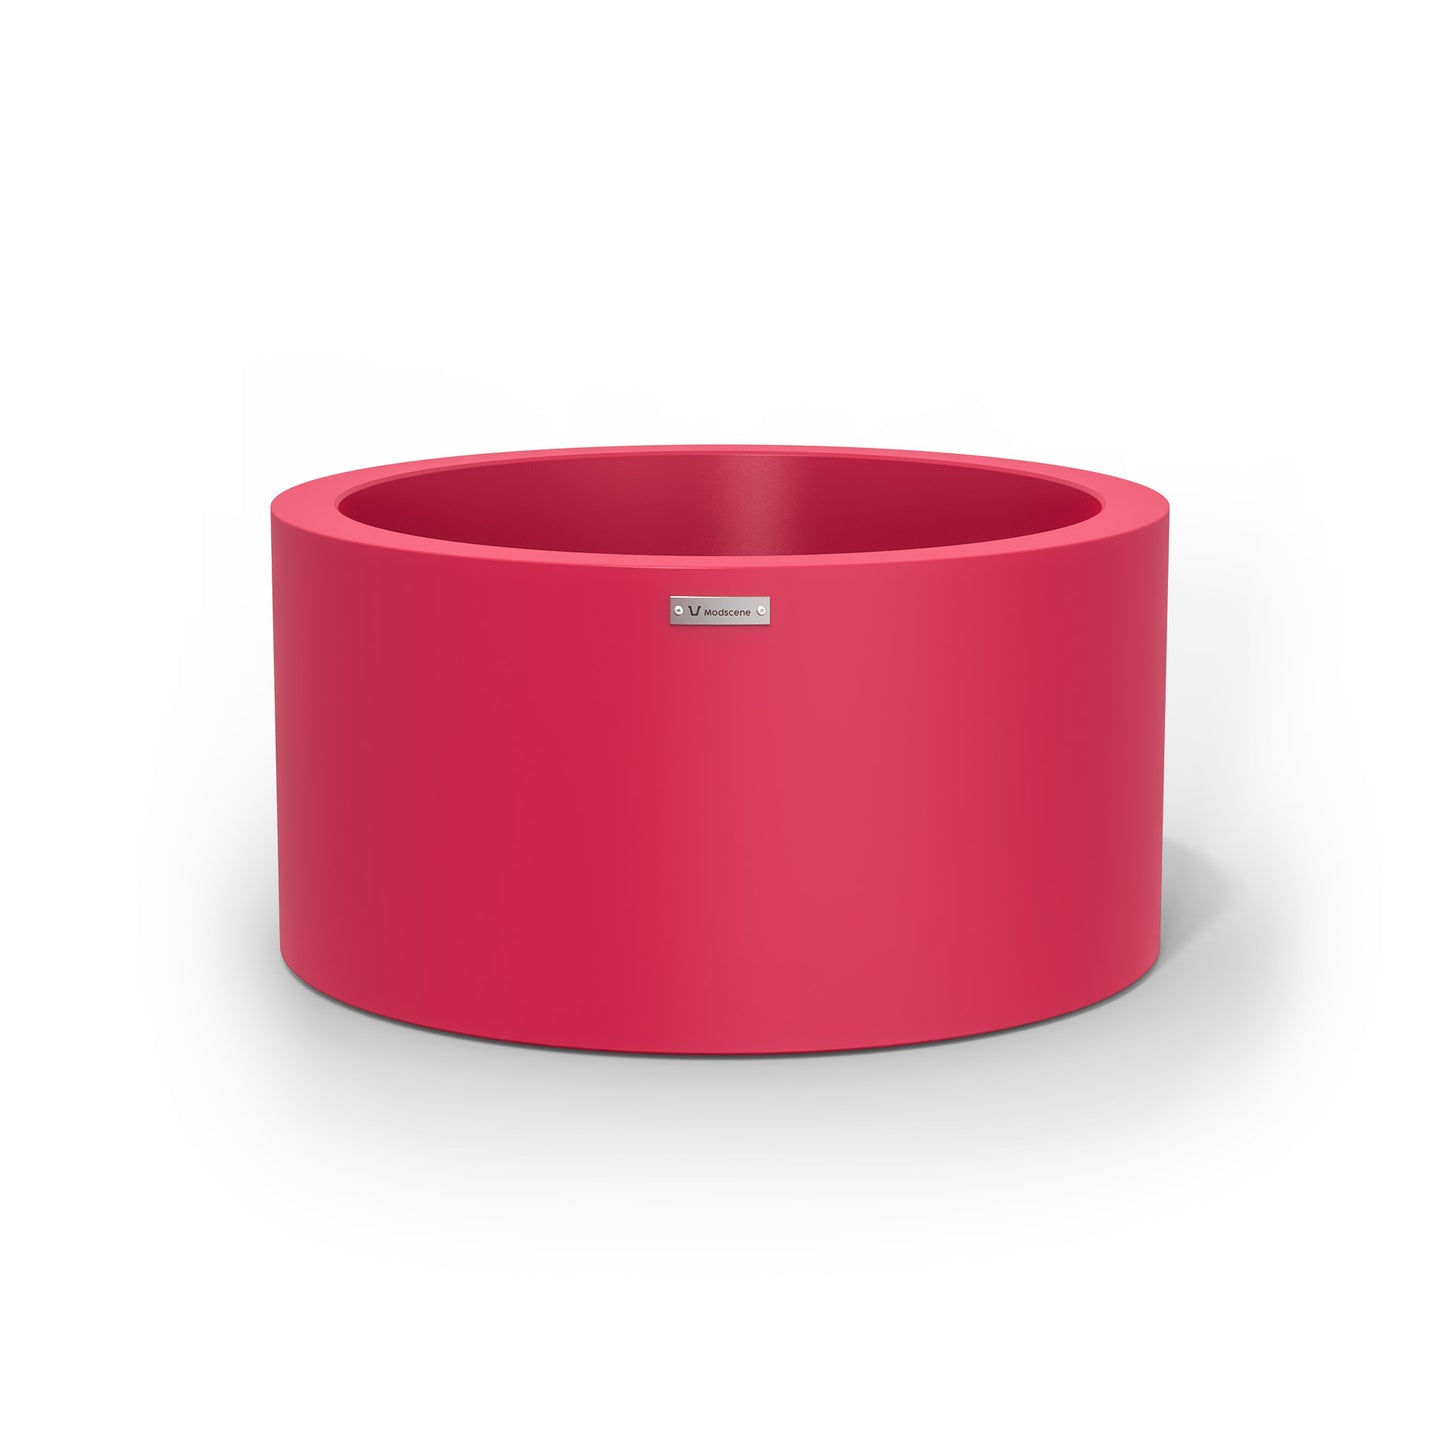 A cylinder shaped pot planter in pink made by Modscene NZ. 